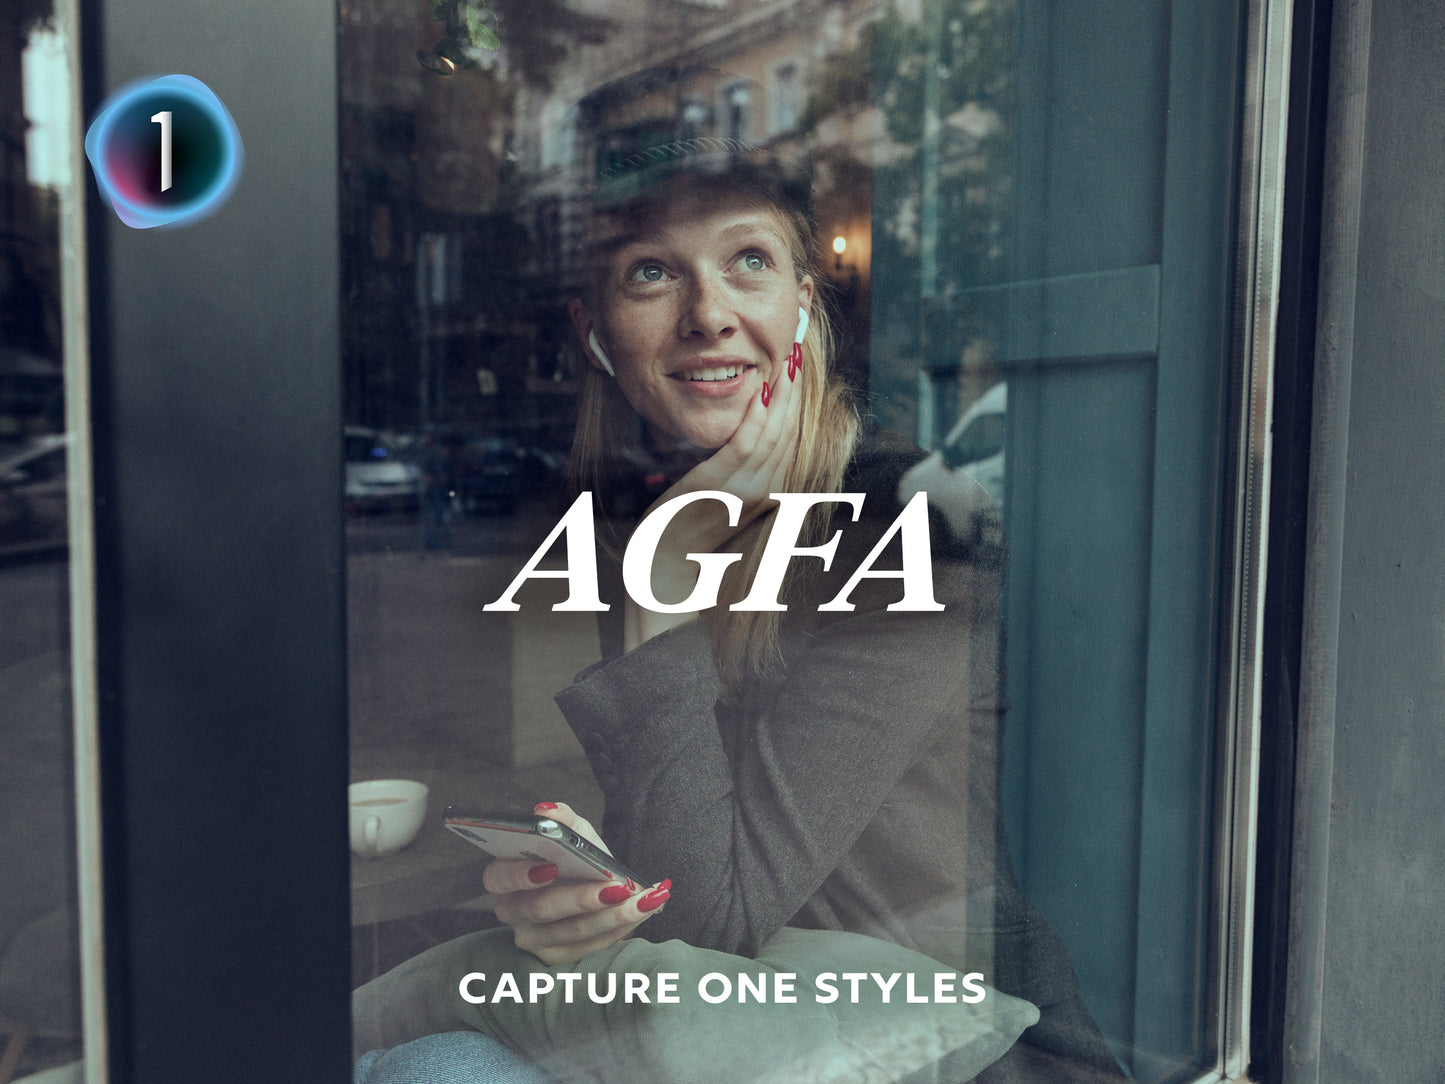 Agfa Capture One Styles